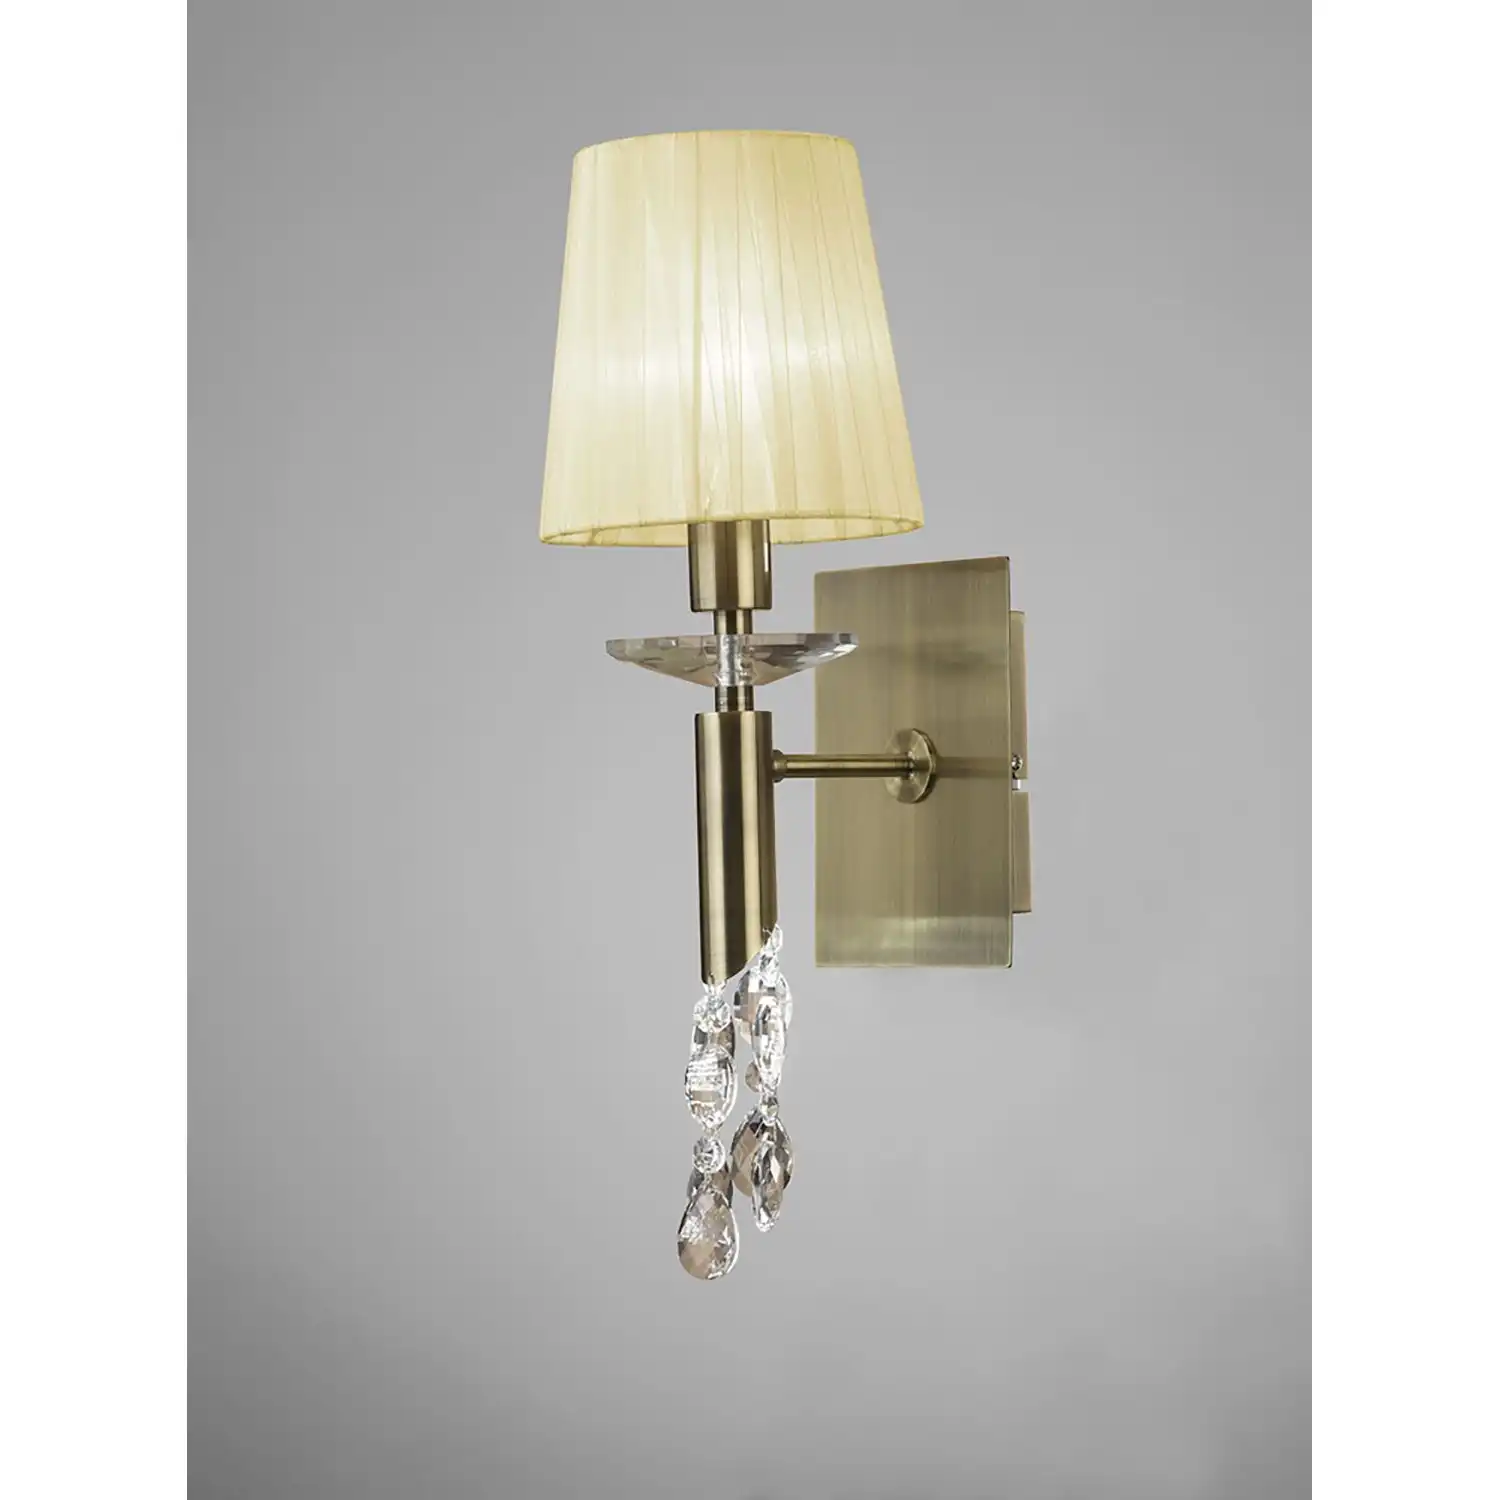 Tiffany Wall Lamp Switched 1+1 Light E14+G9, Antique Brass With Cream Shade And Clear Crystal